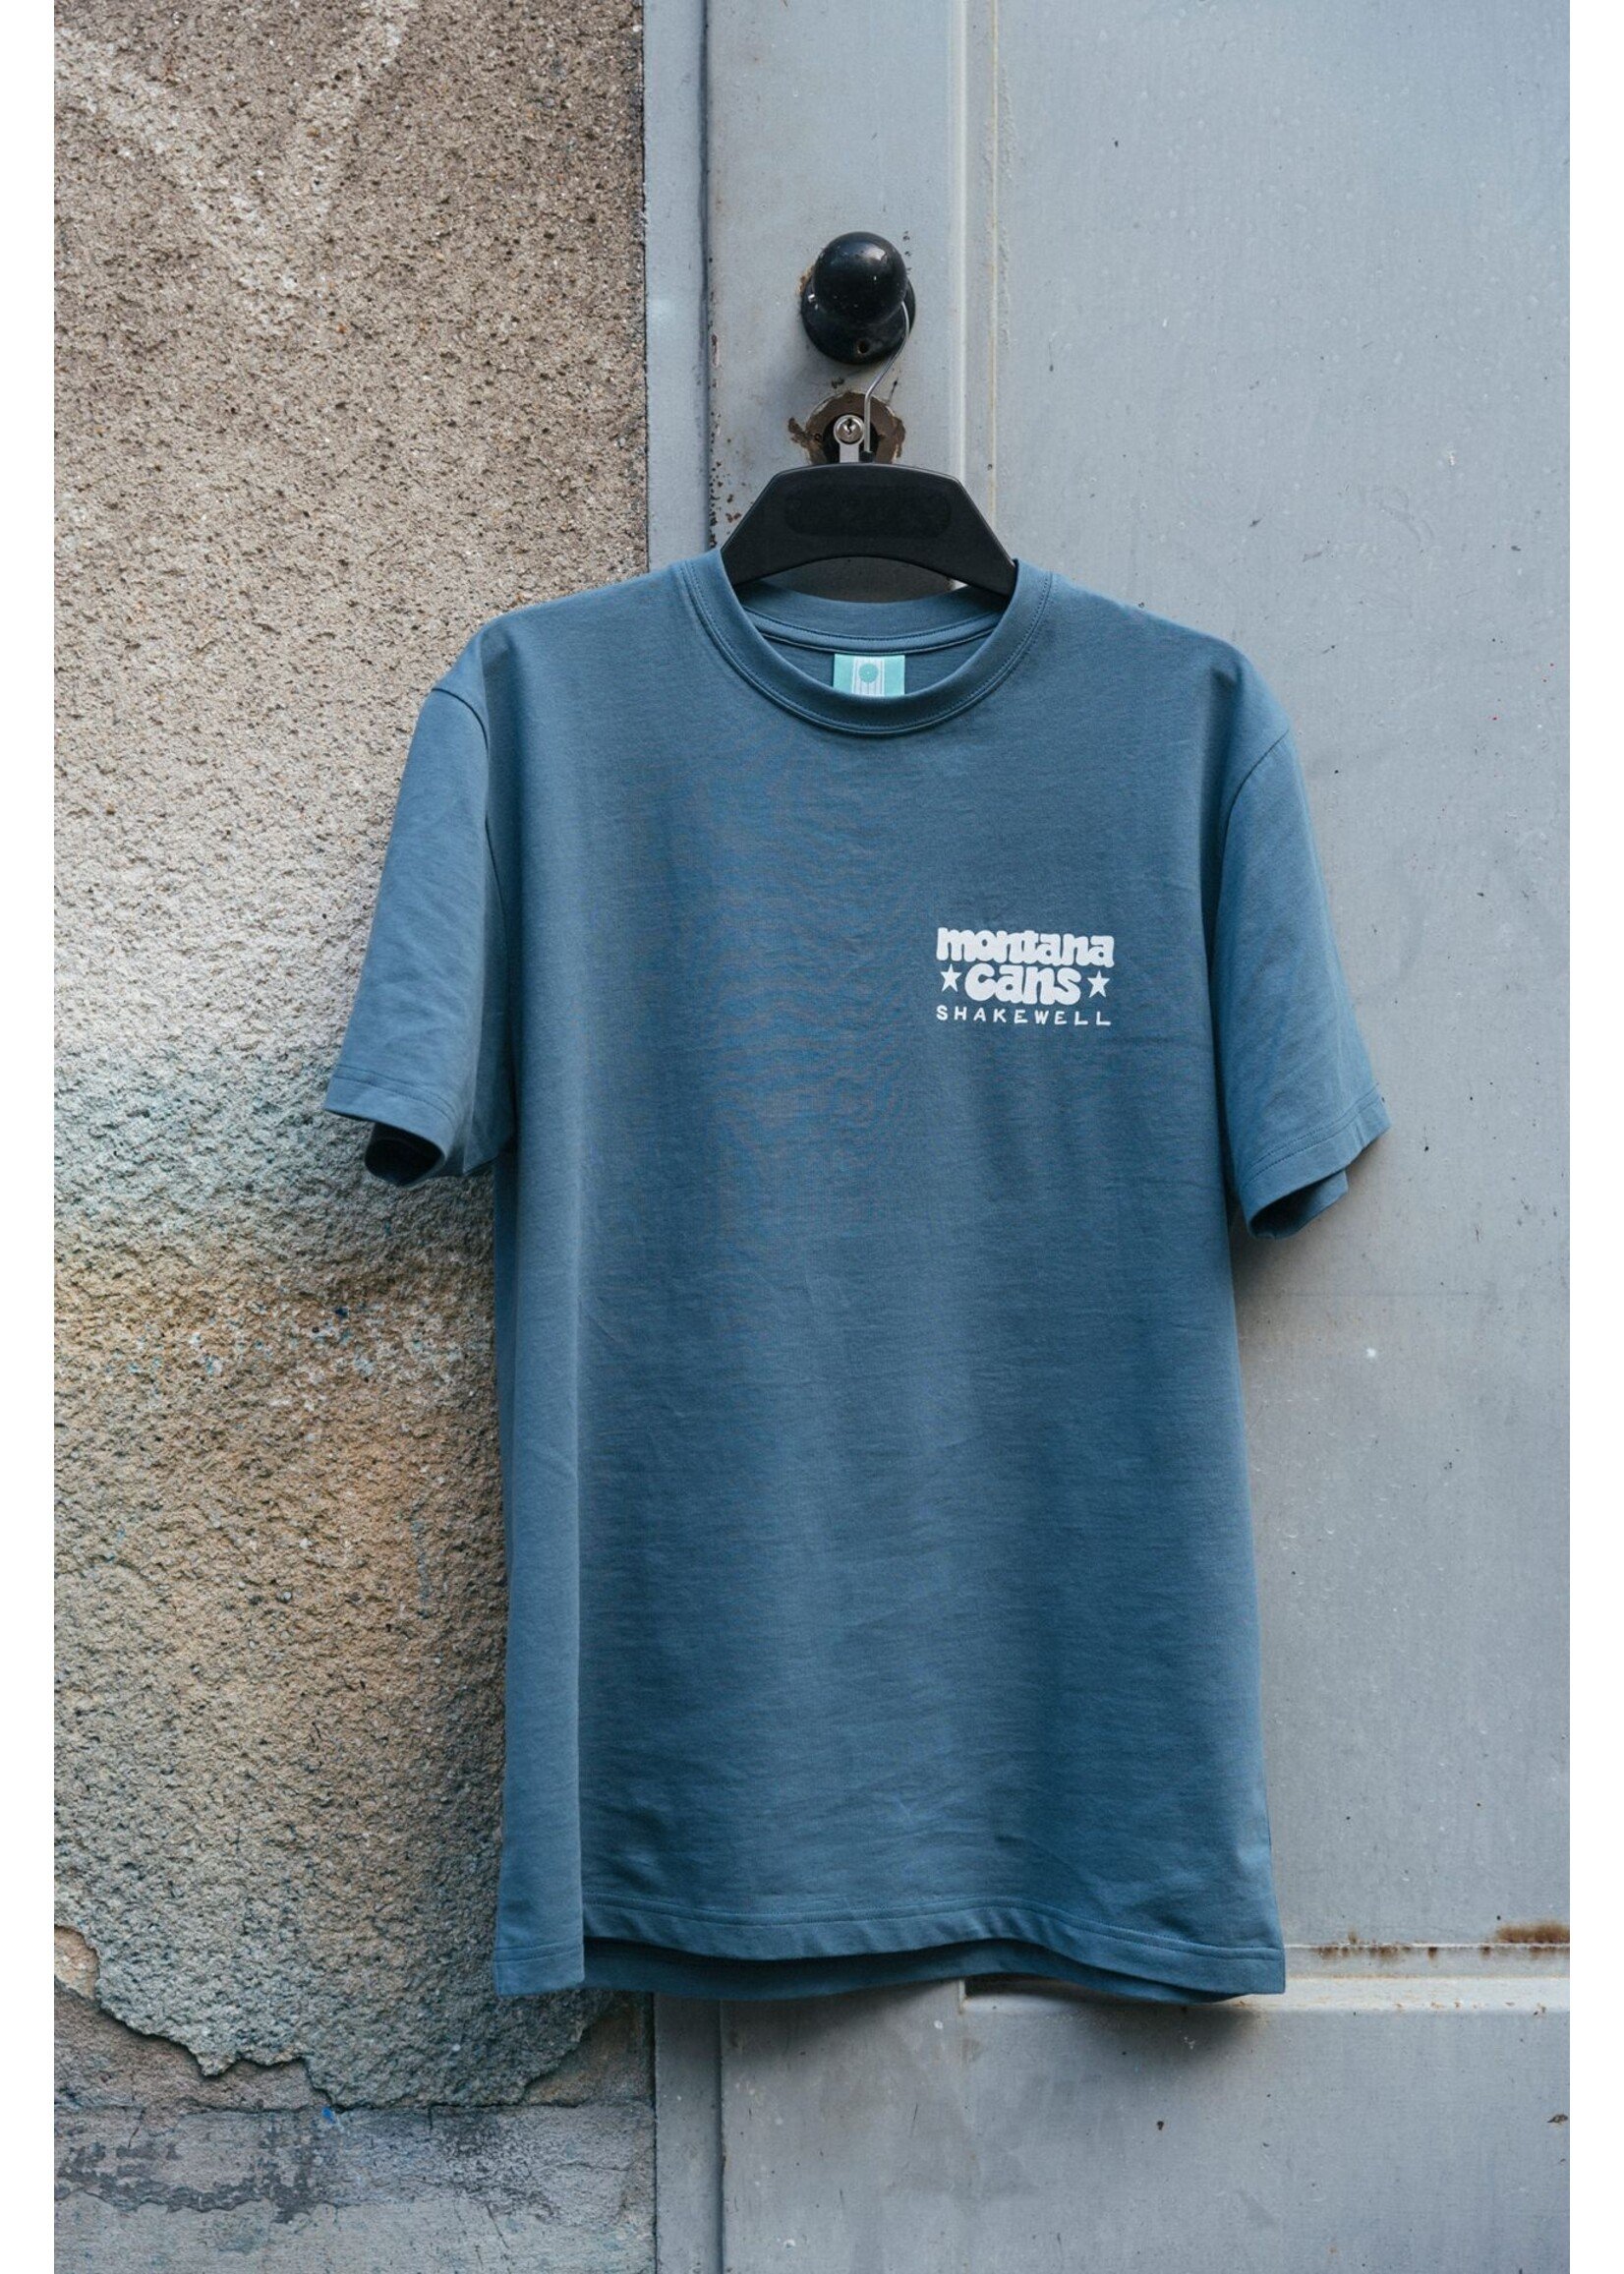 Montana Cans T-SHIRT MC Blue by Tres